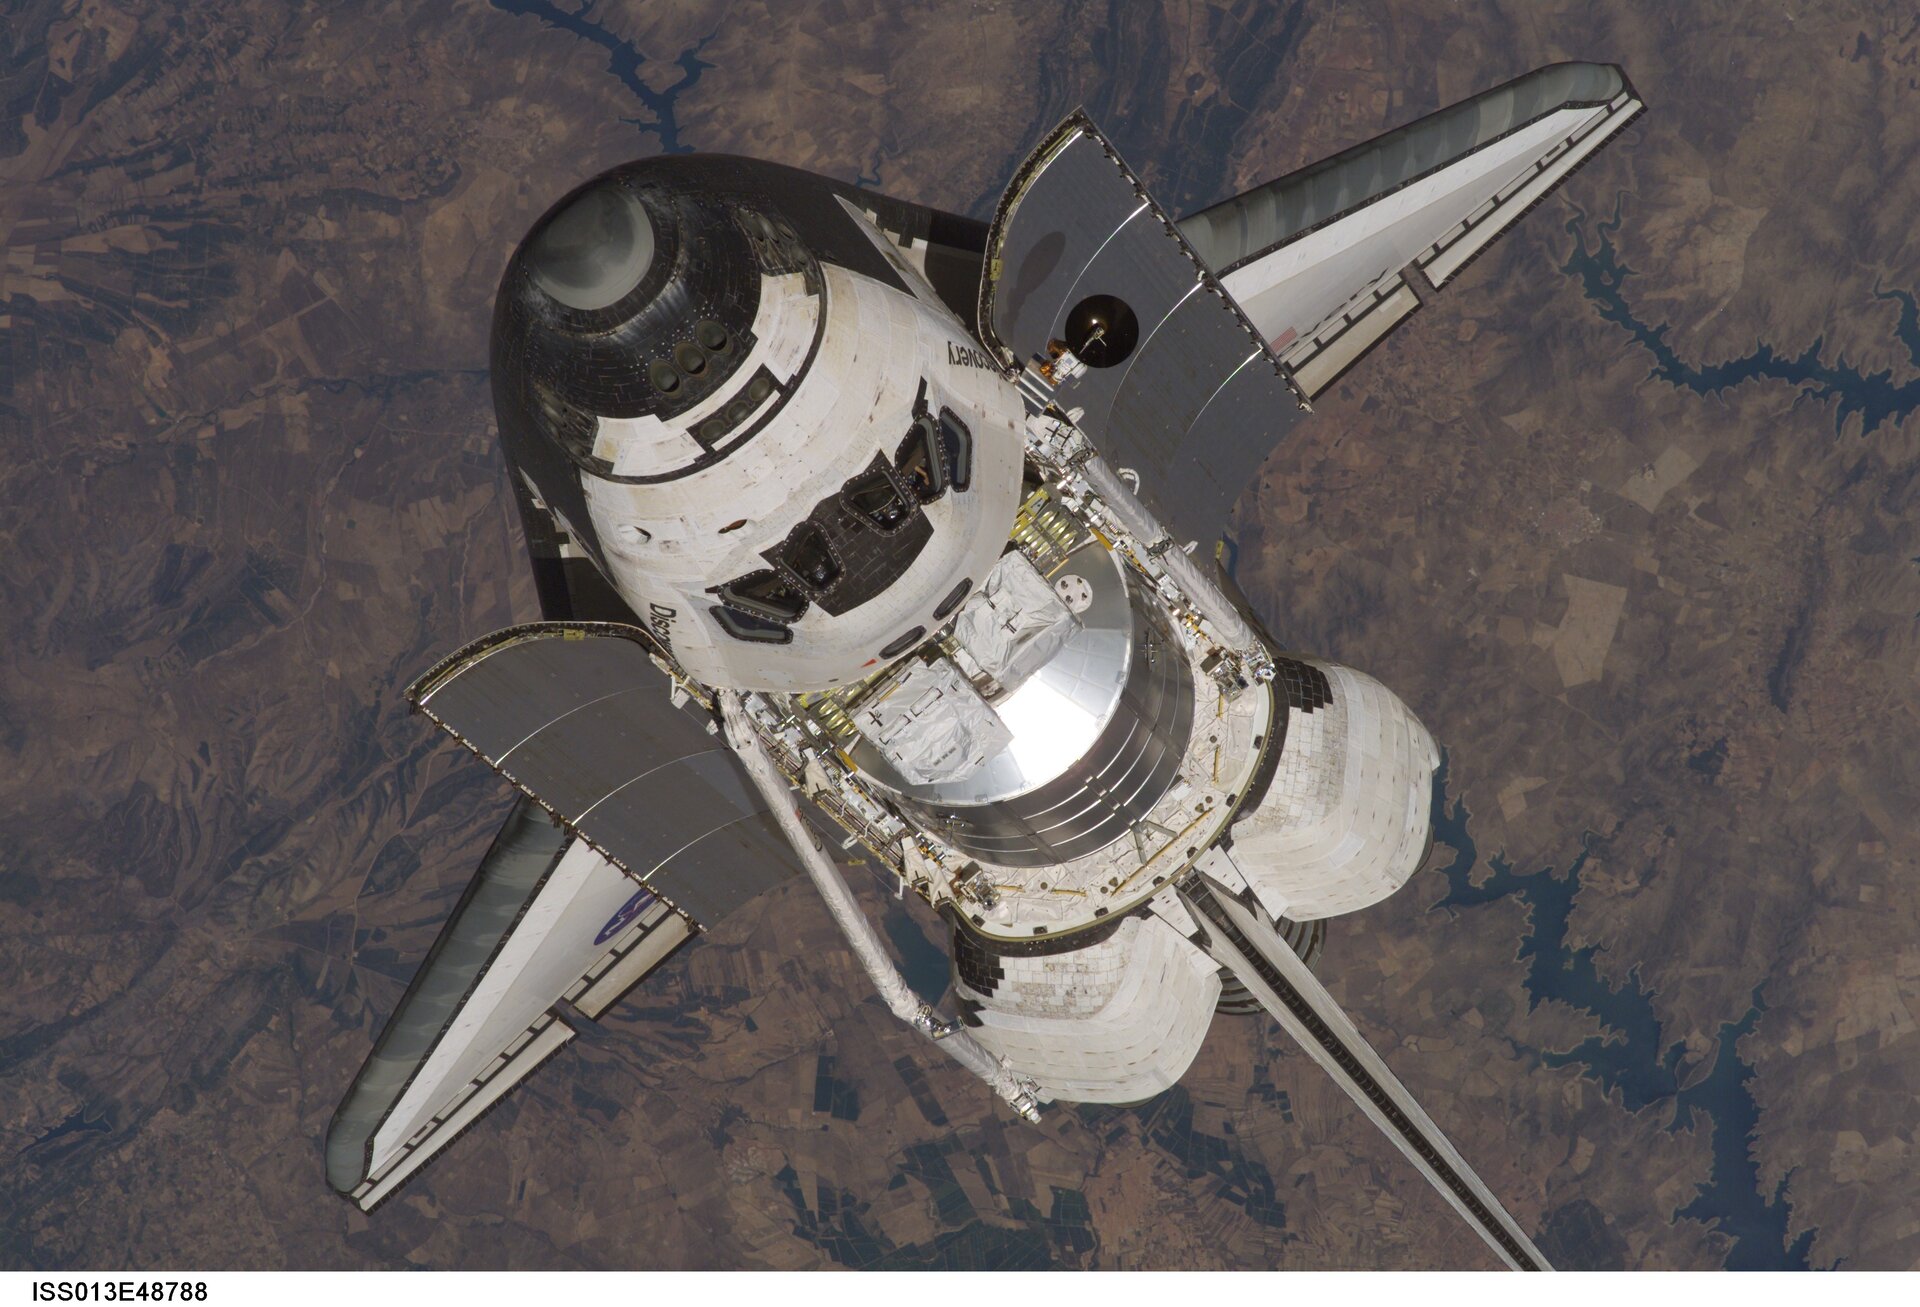 We will inspect the Space Shuttle for damage